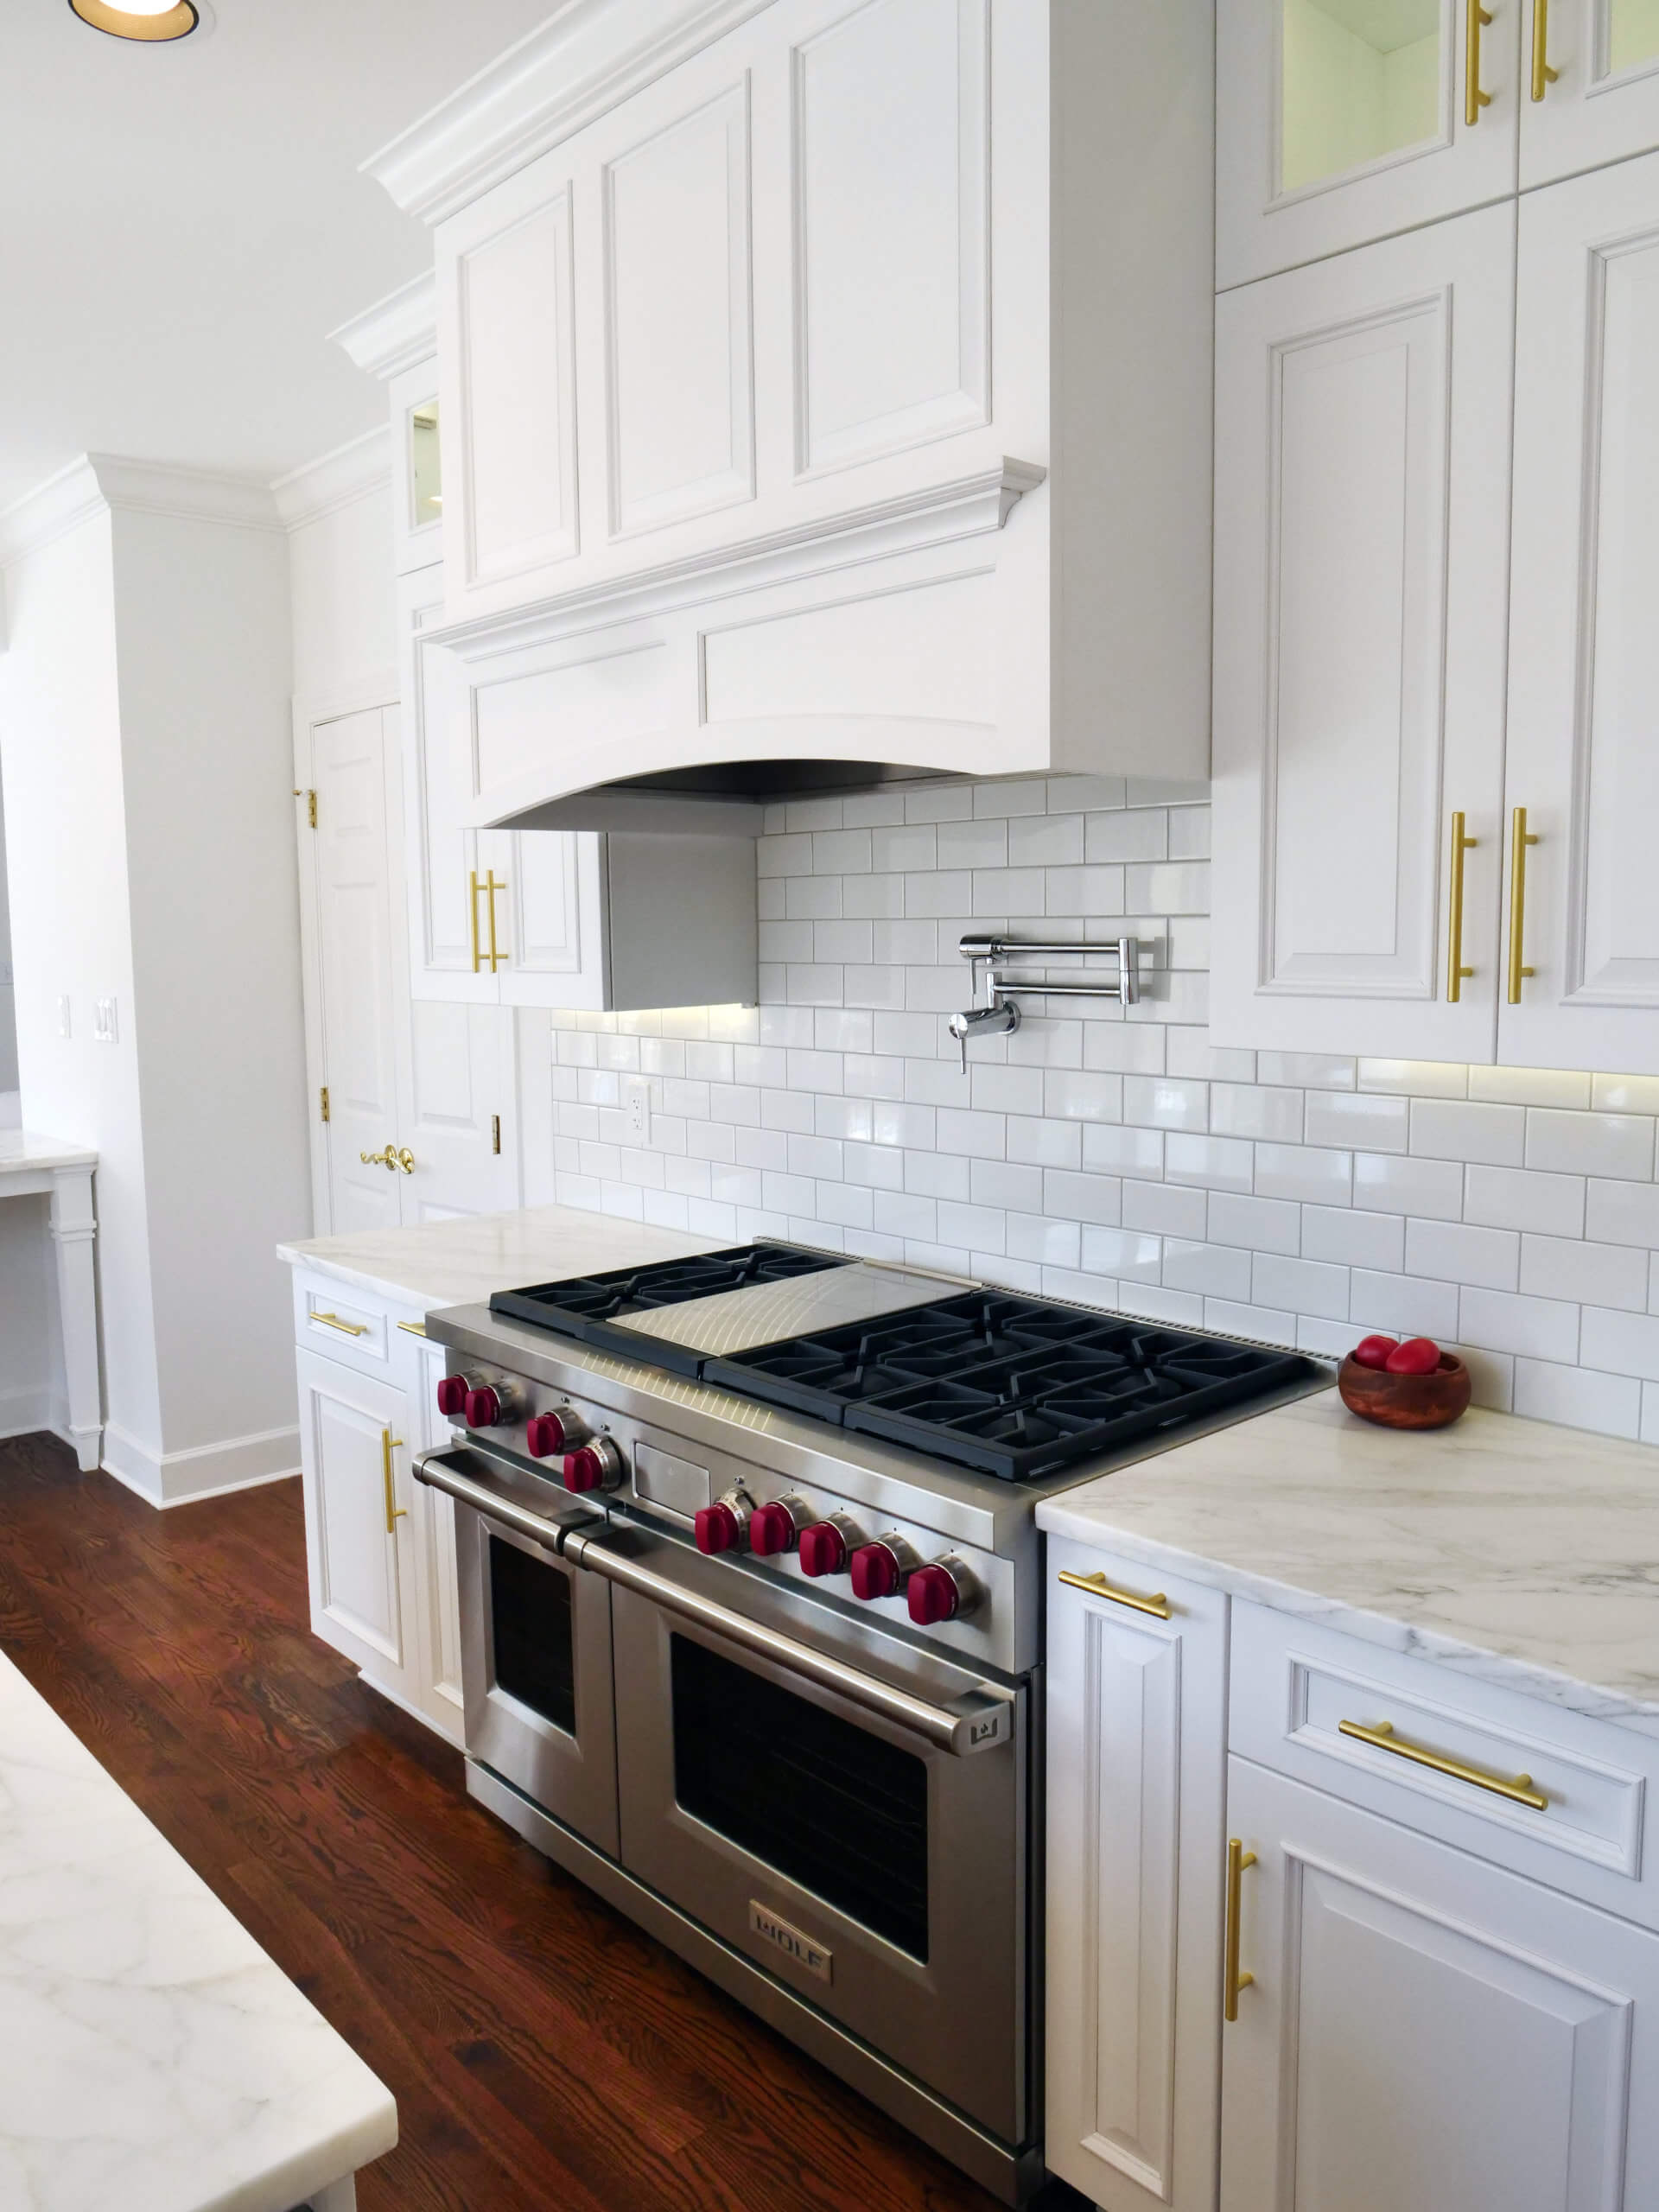 burner side of Marble white counters and cabinets in newly remodeled kitchen